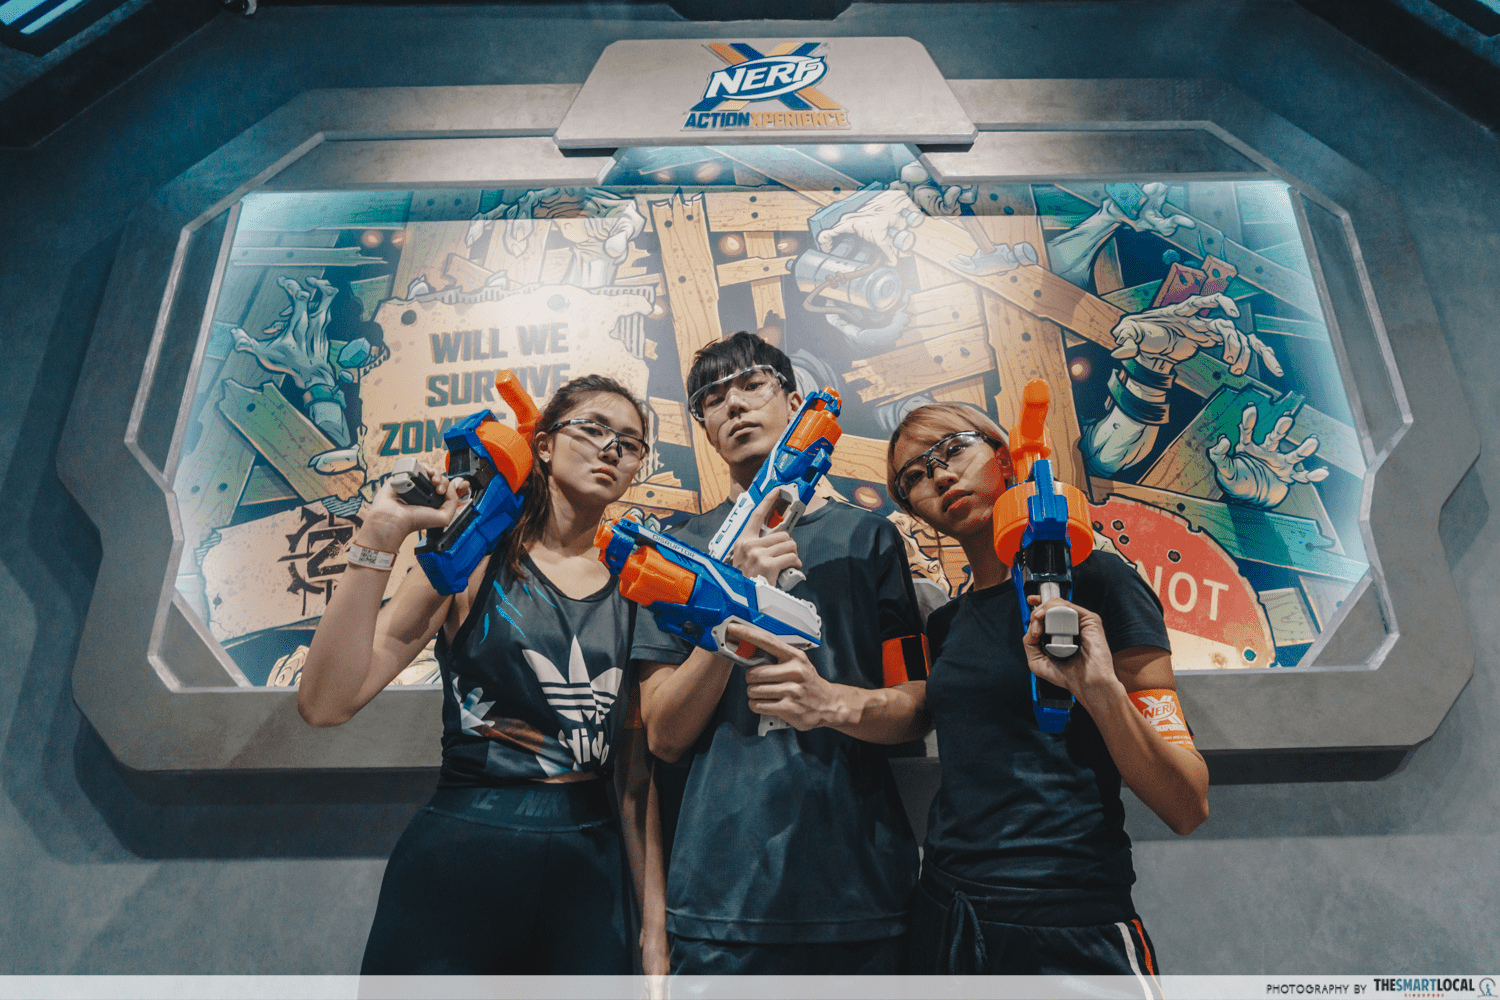 SingapoRediscovers - NERF Action Xperience